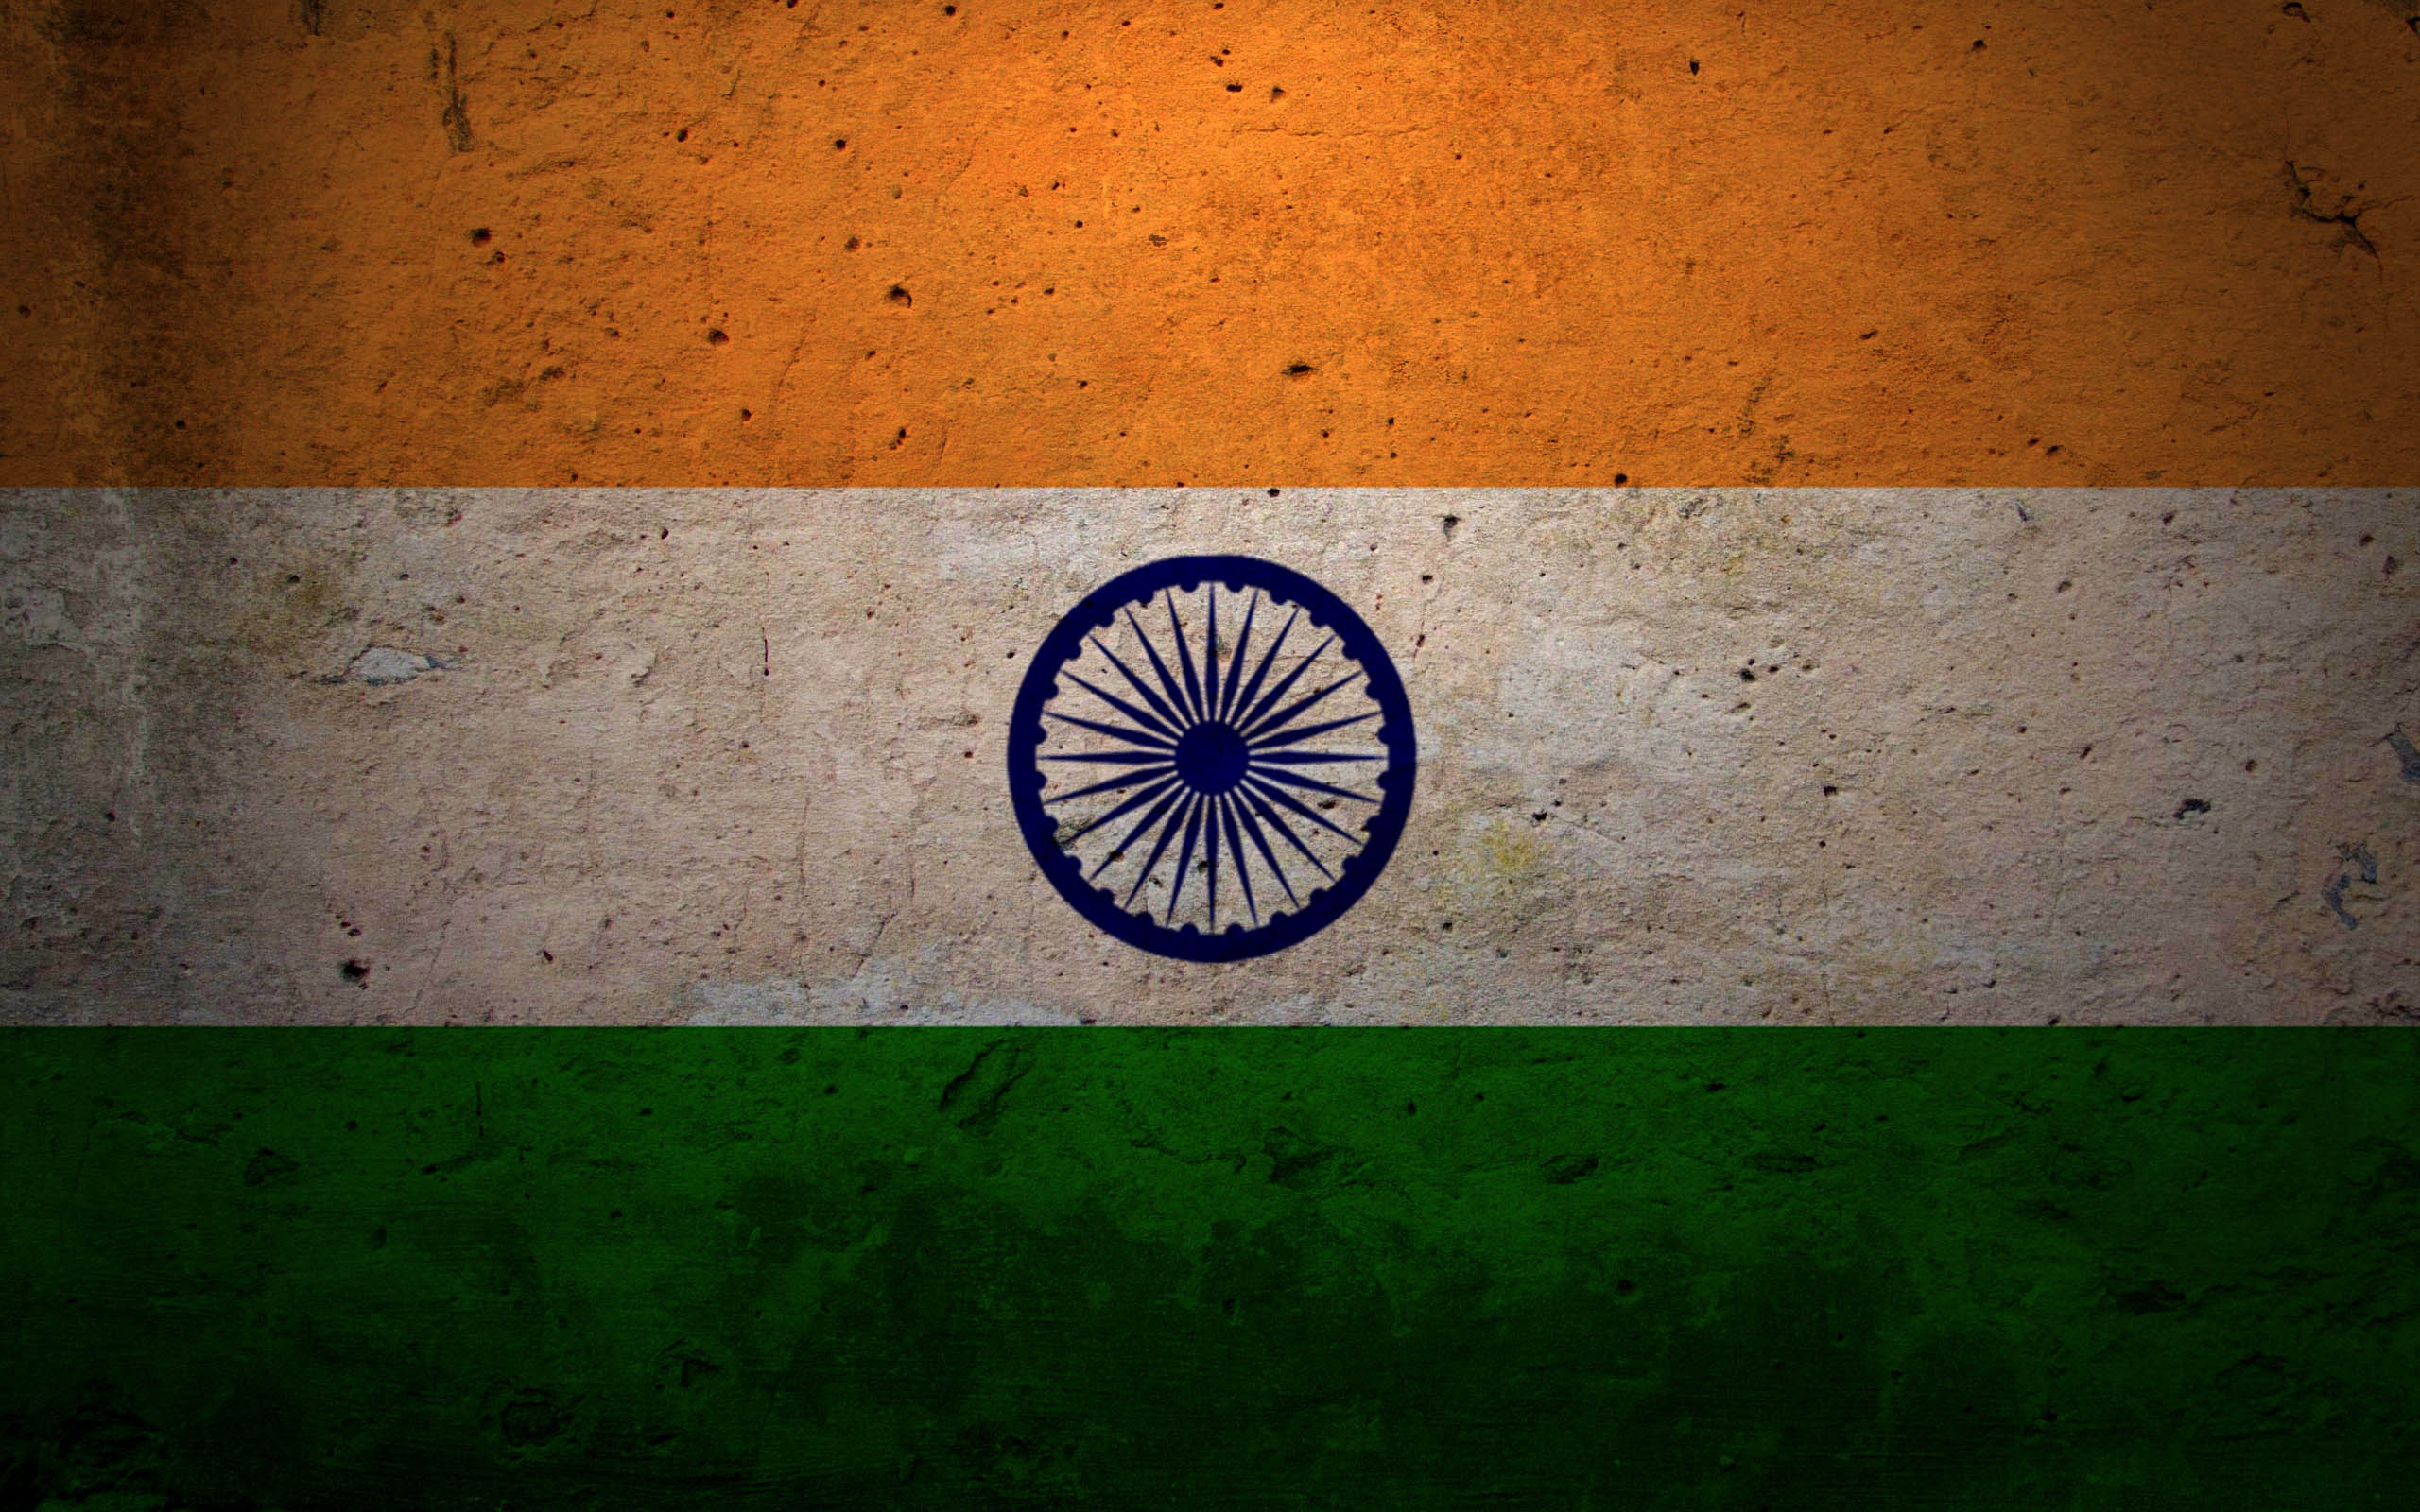 India Flag Clipart Transparent Background Abstract Indian Flag Theme  Background Design Flag Of India Abstract Background Card PNG Image For  Free Download  Indian flag wallpaper Indian flag Indian flag colors